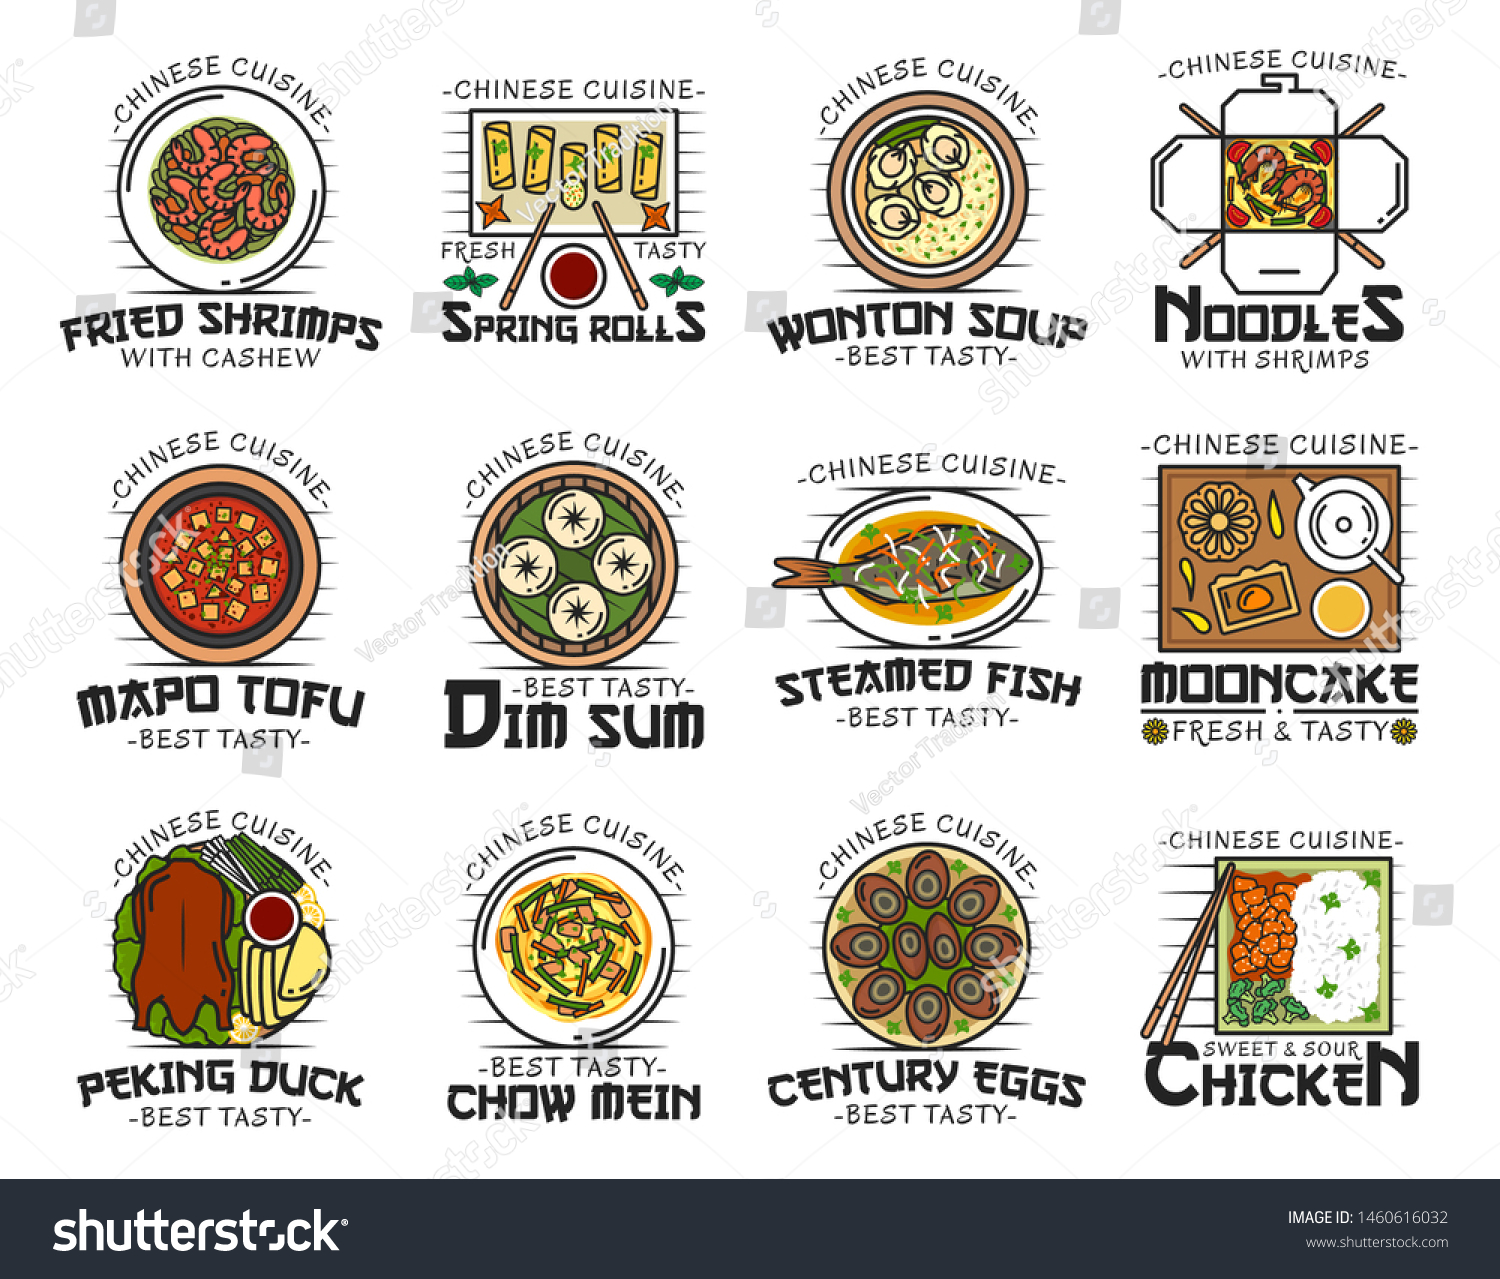 SVG of Chinese cuisine food isolated logos. Vector fried shrimps with cashew, spring rolls and wonton soup, noodles and mapo tofu, dim sum and steamed fish, mooncake and peking duck, chow mein and chicken svg